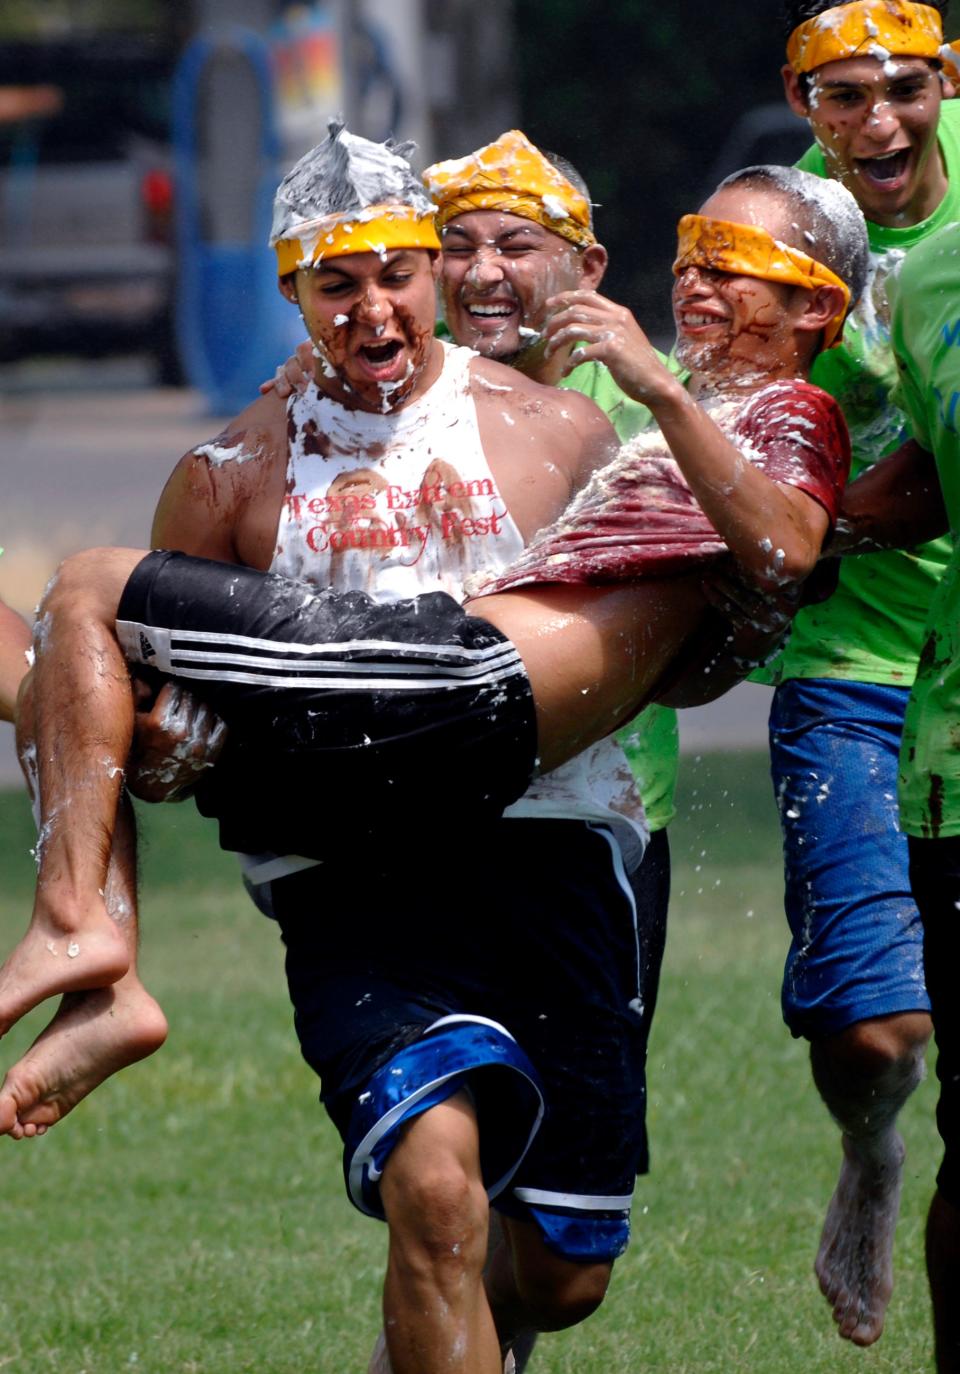 Rolando Mendoza of Wimberley carries Raul Castillo of Abilene during The Human Cake contest. His teammates covered Castillo in oil, eggs milk and flour and then carried him up and back across the field. McMurry University held its annual Slime Olympics in August 2010 as part of their incoming freshman orientation.